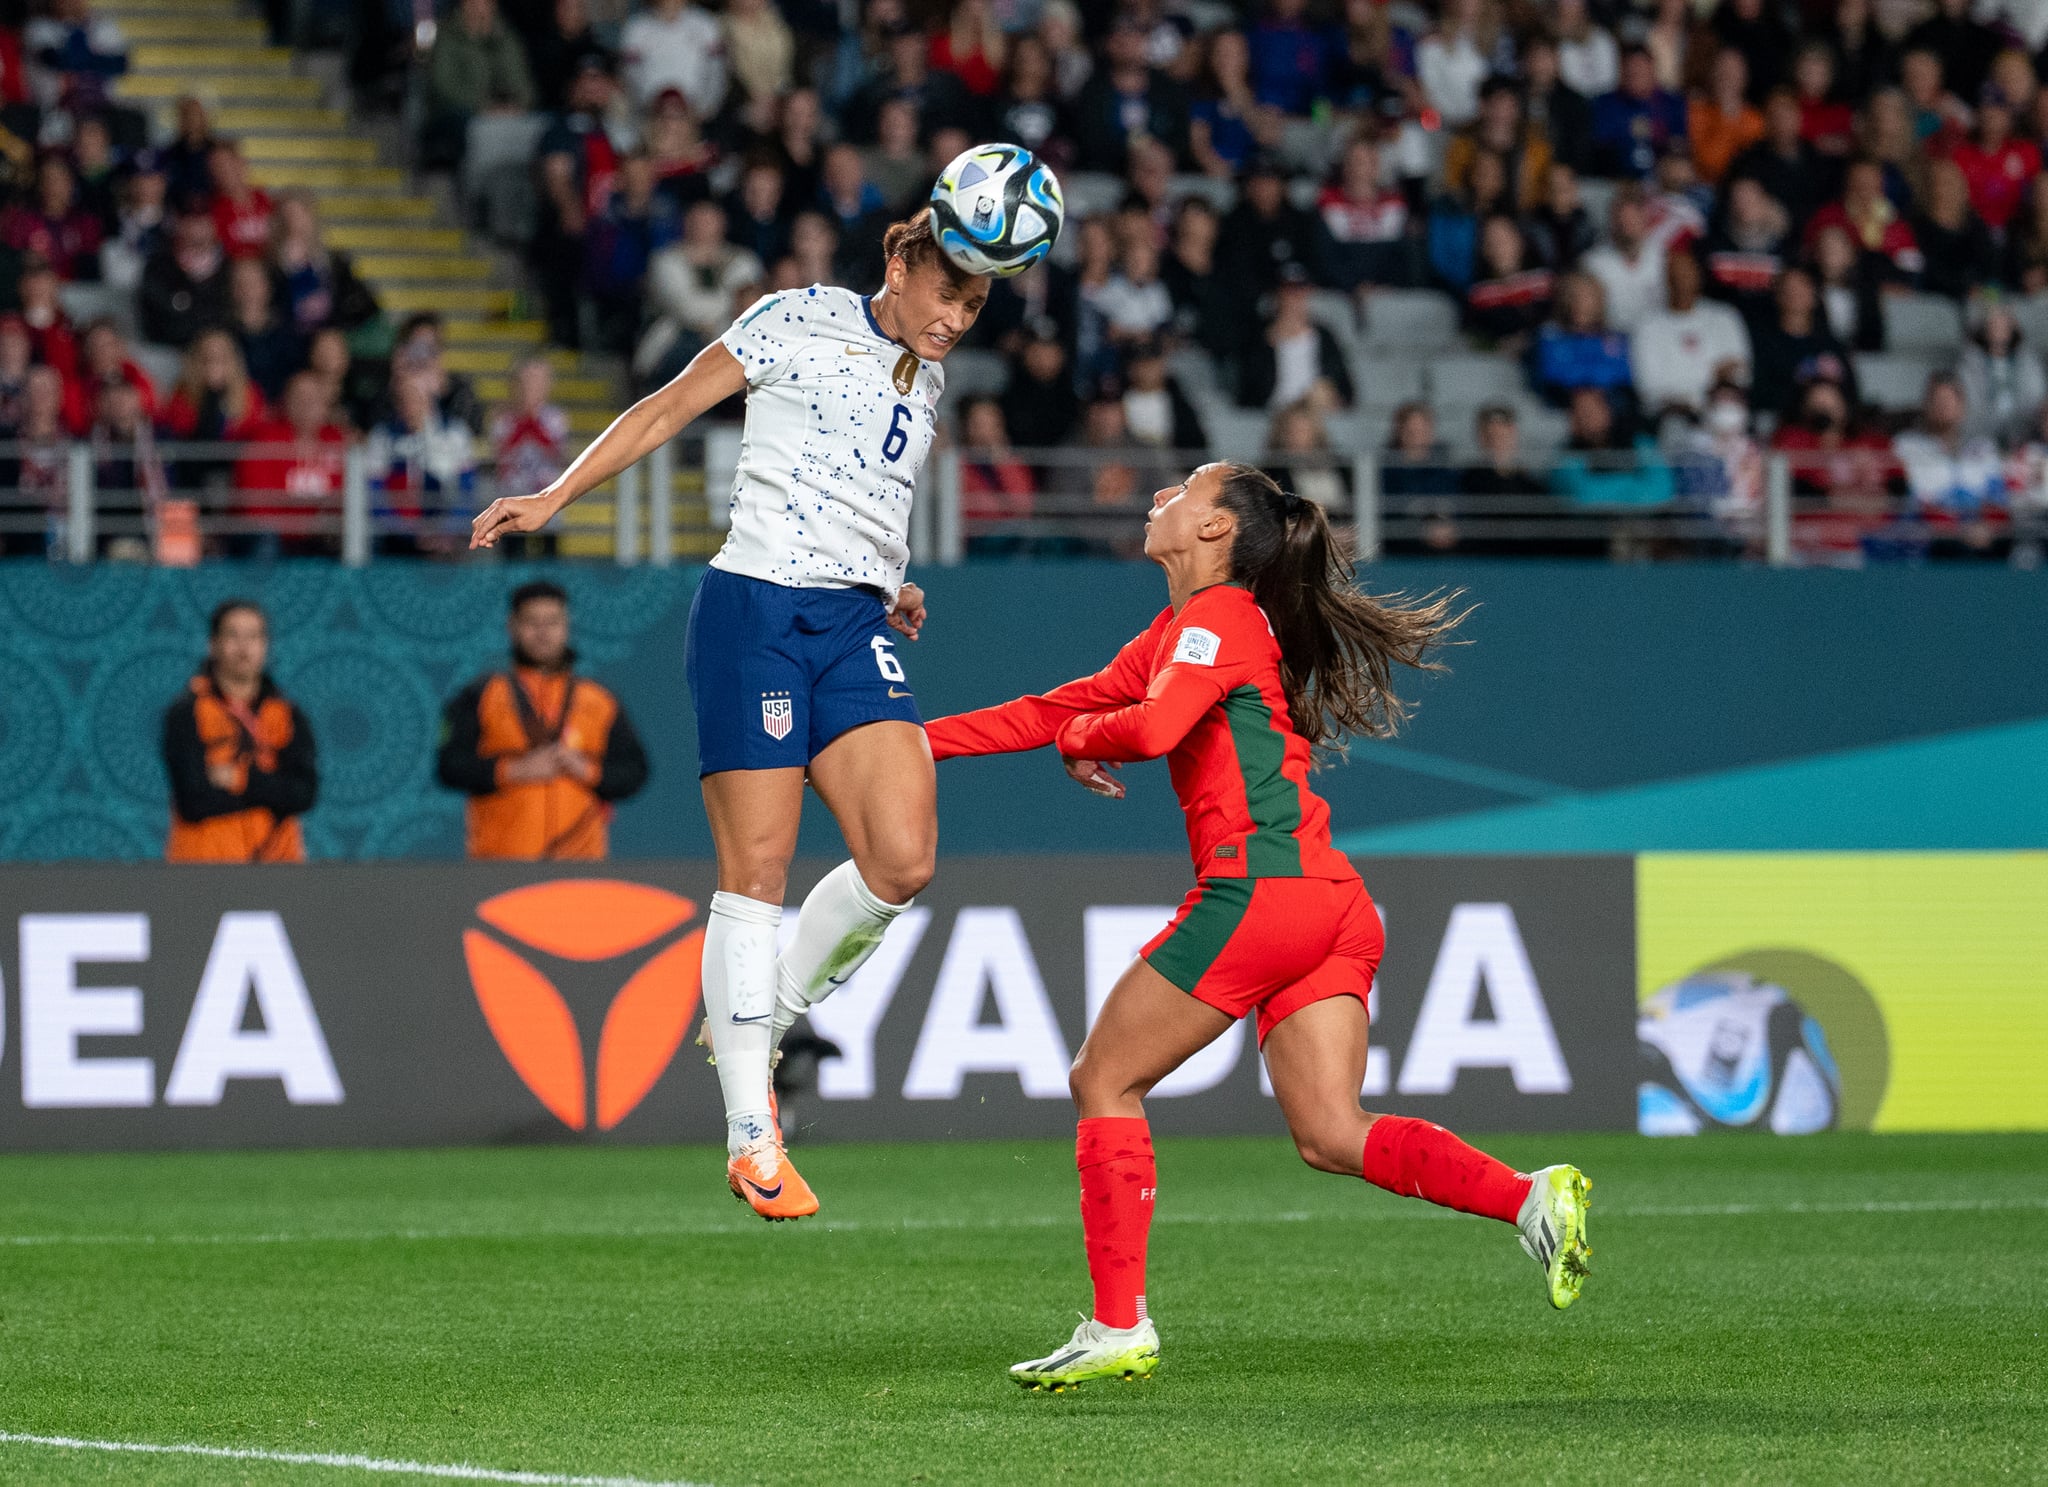 AUCKLAND, NEW ZEALAND - AUGUST 1: Lynn Williams #6 of the United States heads the ball during a FIFA World Cup Group Stage game between Portugal and USA at Eden Park on August 1, 2023 in Auckland, New Zealand. (Photo by Brad Smith/USSF/Getty Images for USSF).